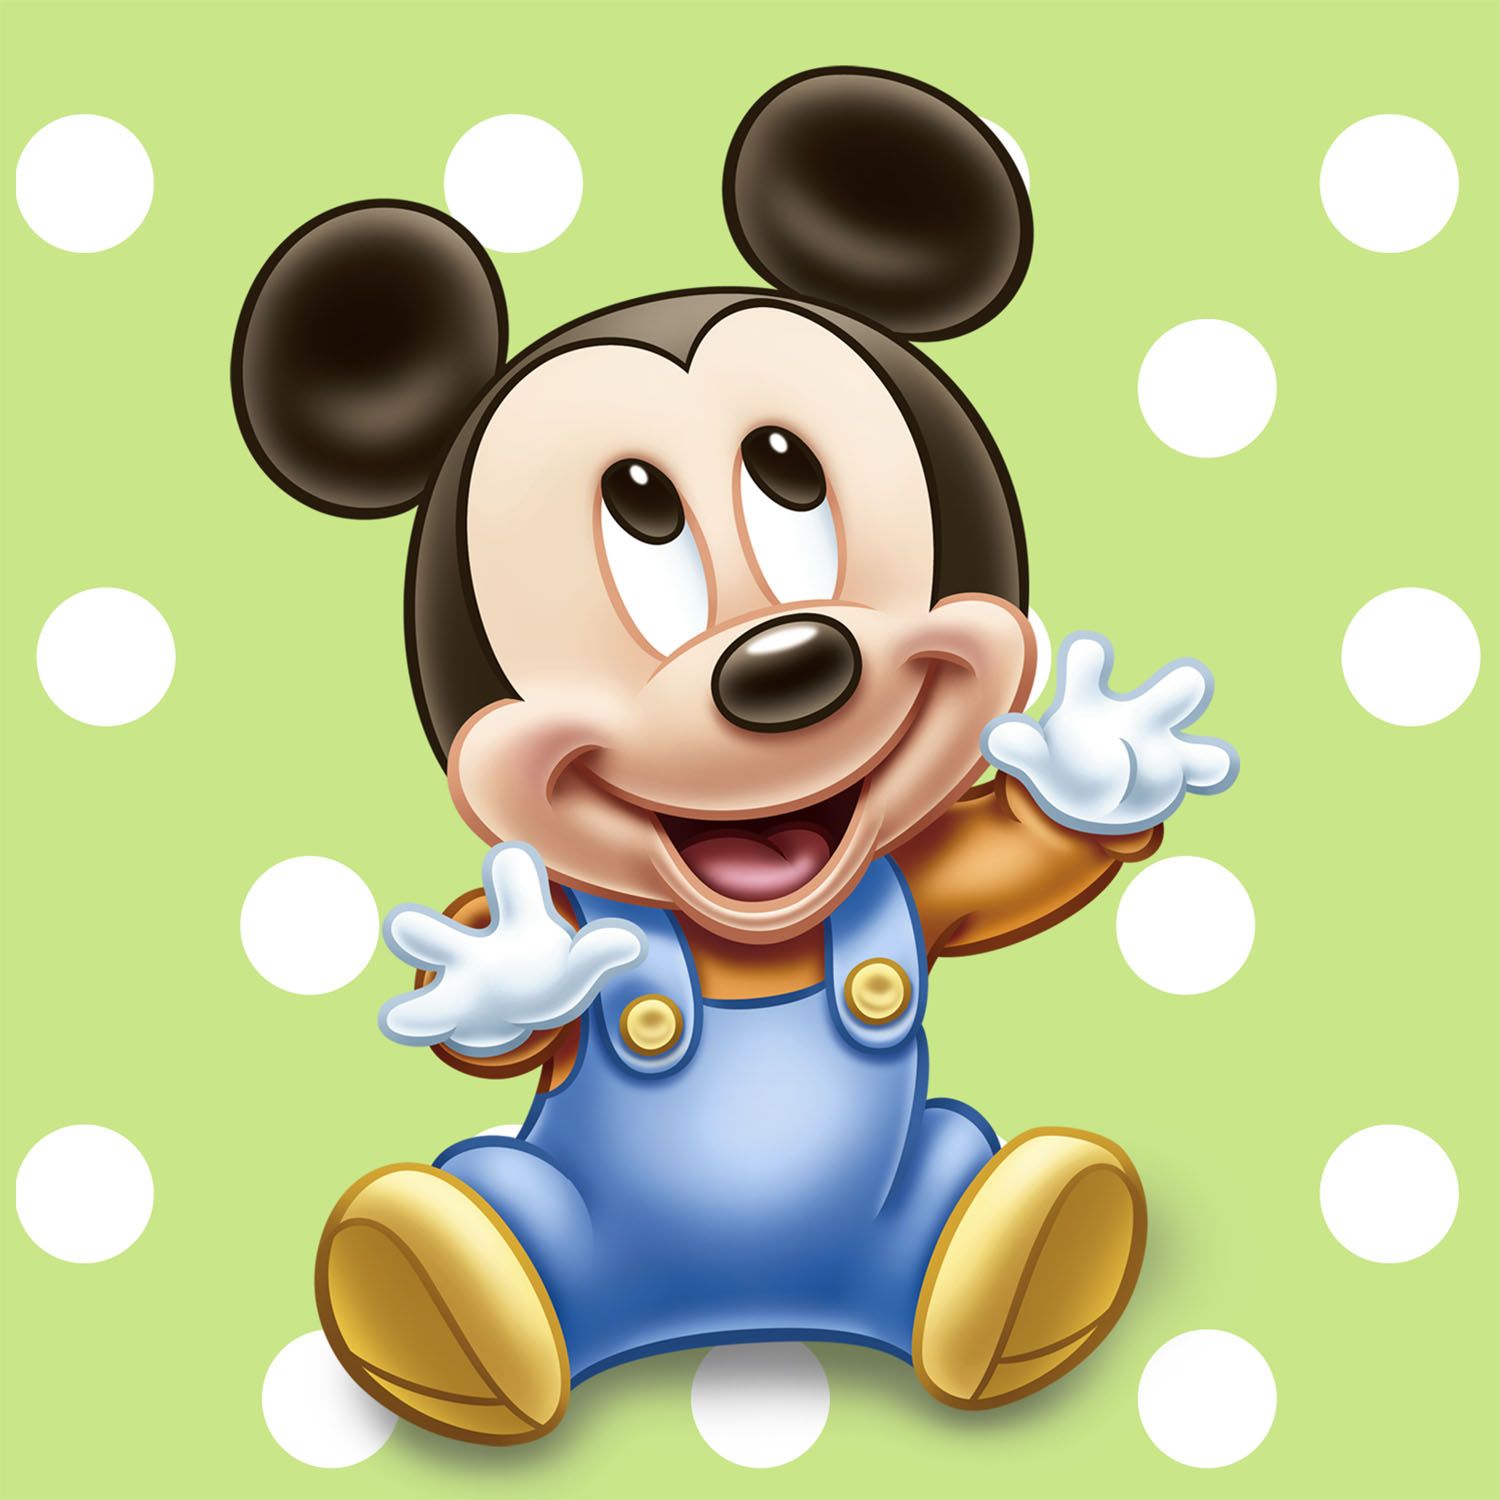 Free download 1500x1500 px image id 2924955905316 baby mickey mouse wallpaper [1500x1500] for your Desktop, Mobile & Tablet. Explore Baby Mickey Mouse Wallpaper. Mickey And Minnie Wallpaper, Baby Minnie